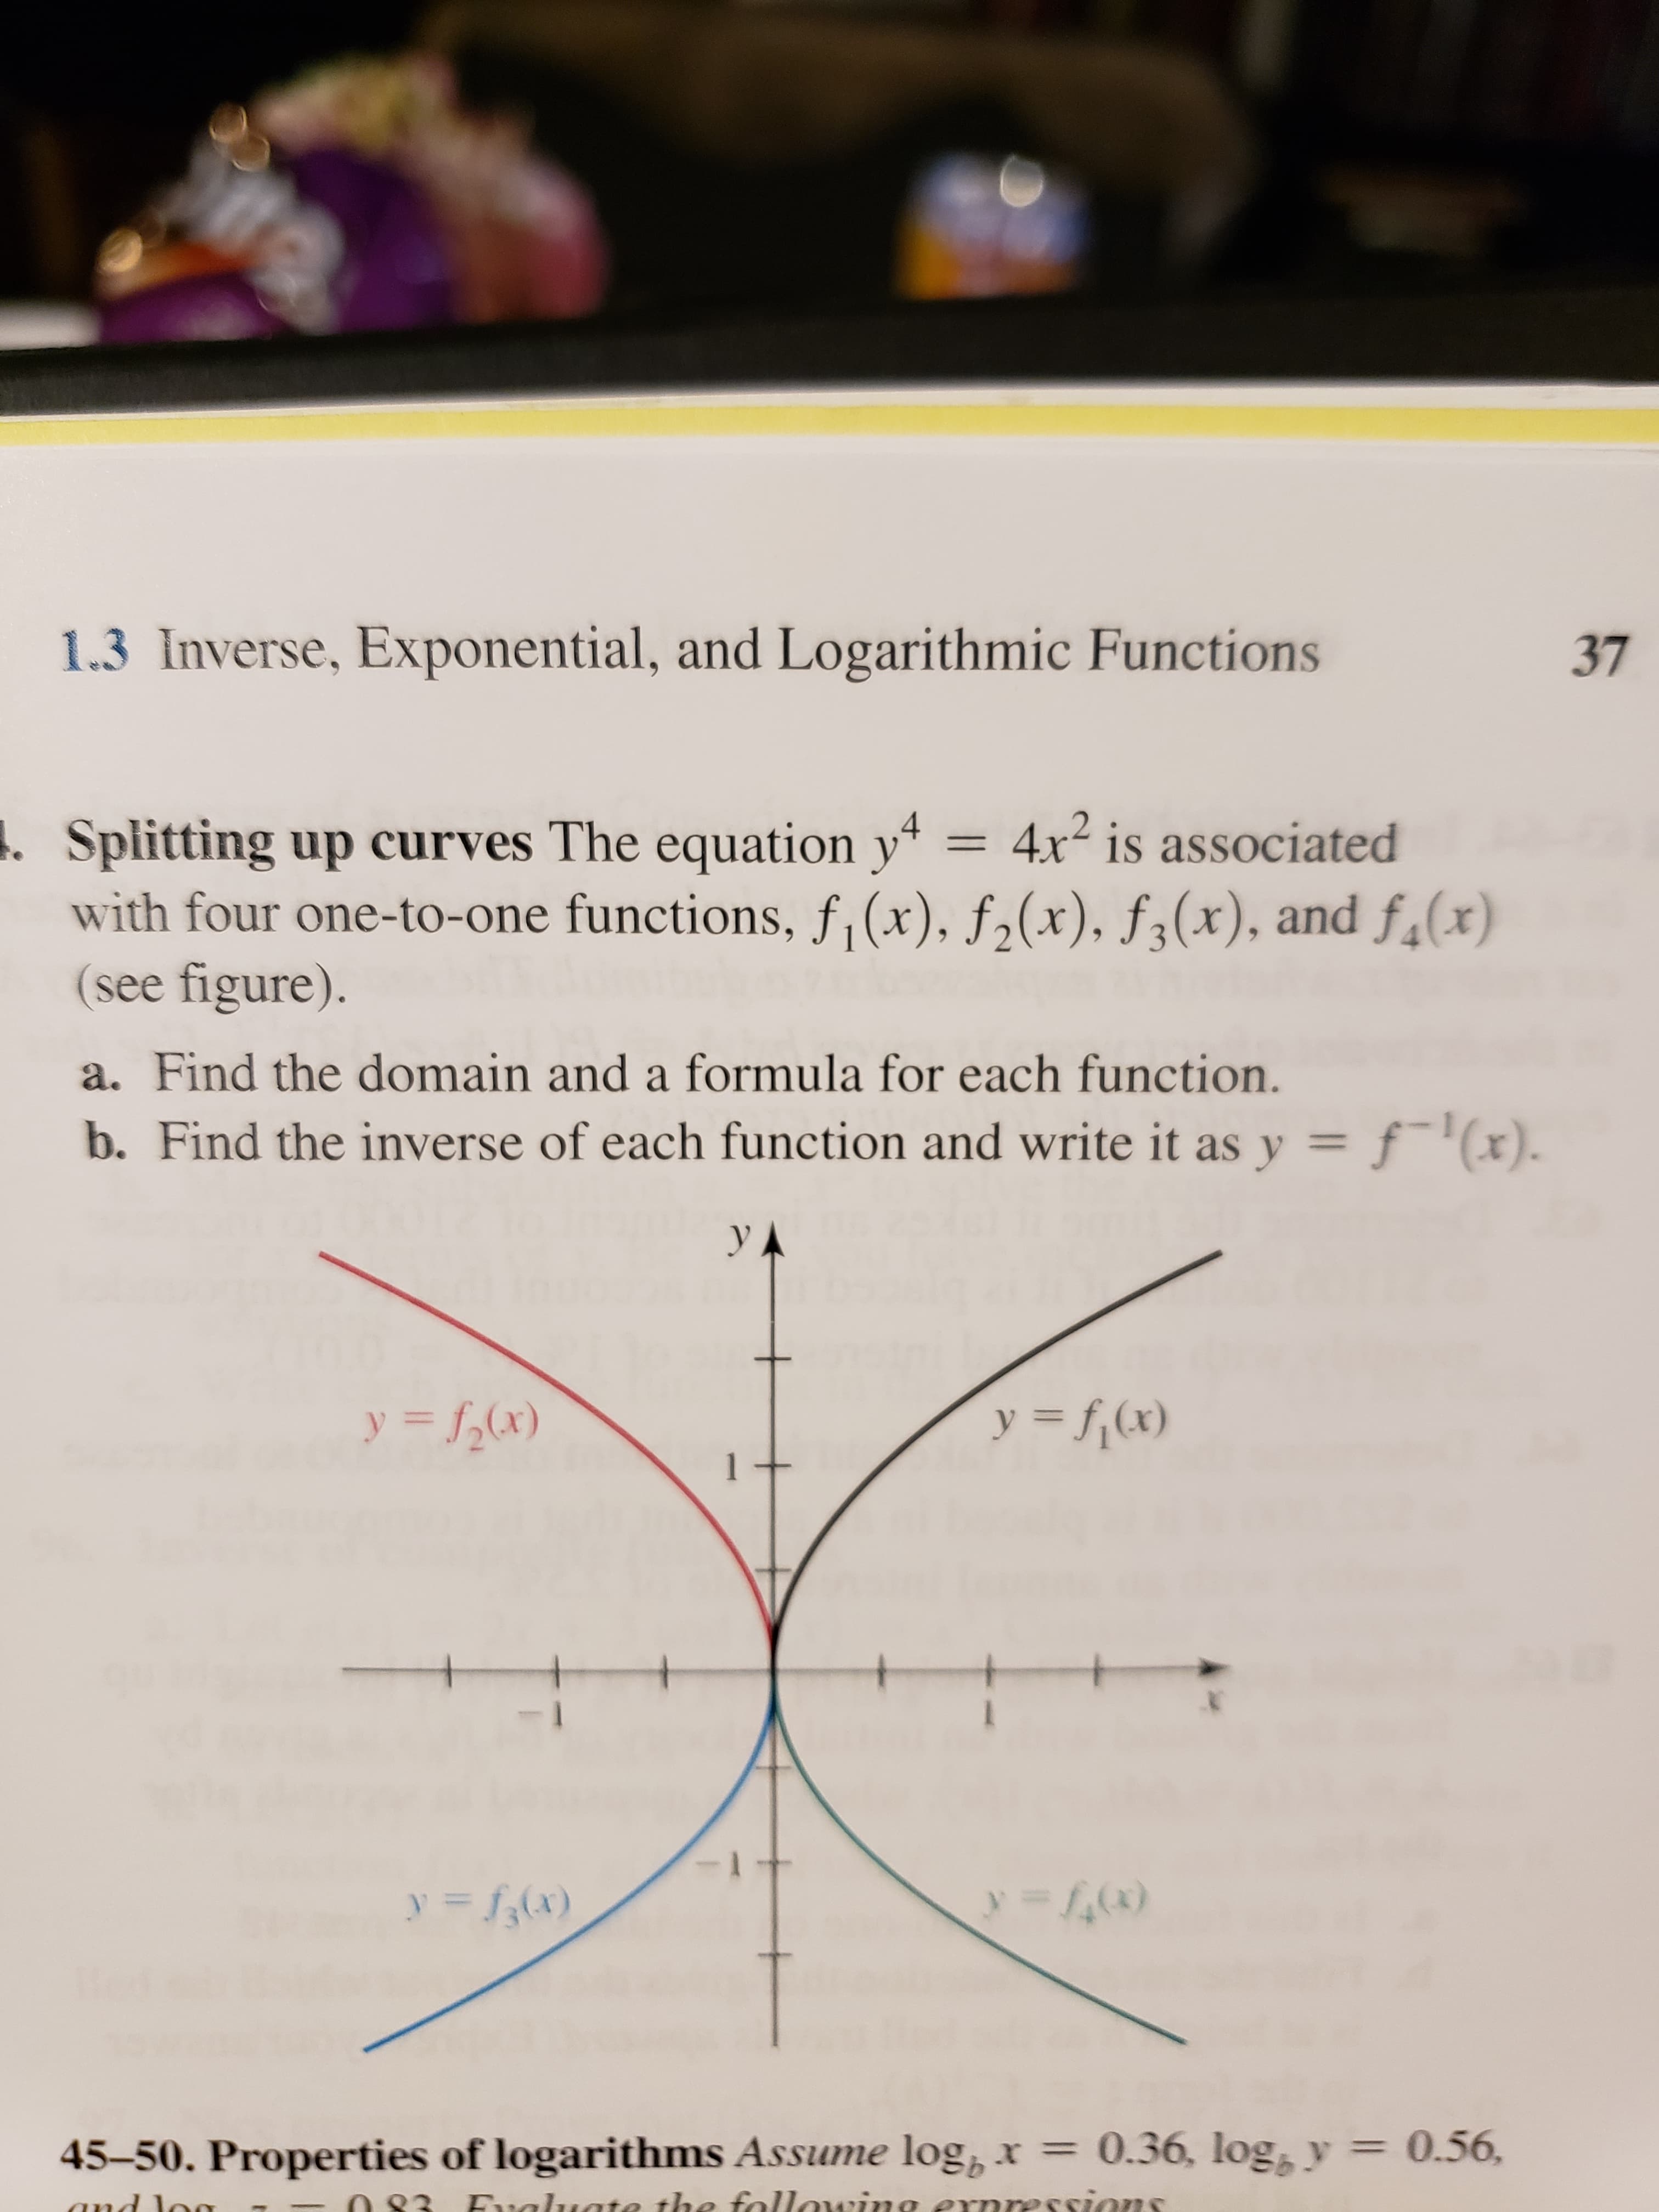 1.3 Inverse, Exponential, and Logarithmic Functions
37
Splitting up curves The equation y
with four one-to-one functions, f,(x), f,(x), f (x), and f(x)
(see figure).
4x is associated
a. Find the domain and a formula for each function.
b. Find the inverse of each function and write it as y
f(x)
yA
y =f(x)
y=x)
0.56,
45-50. Properties of logarithms Assume log,x 0.36, log y
Fualuate the fallawing exnressions
and la
